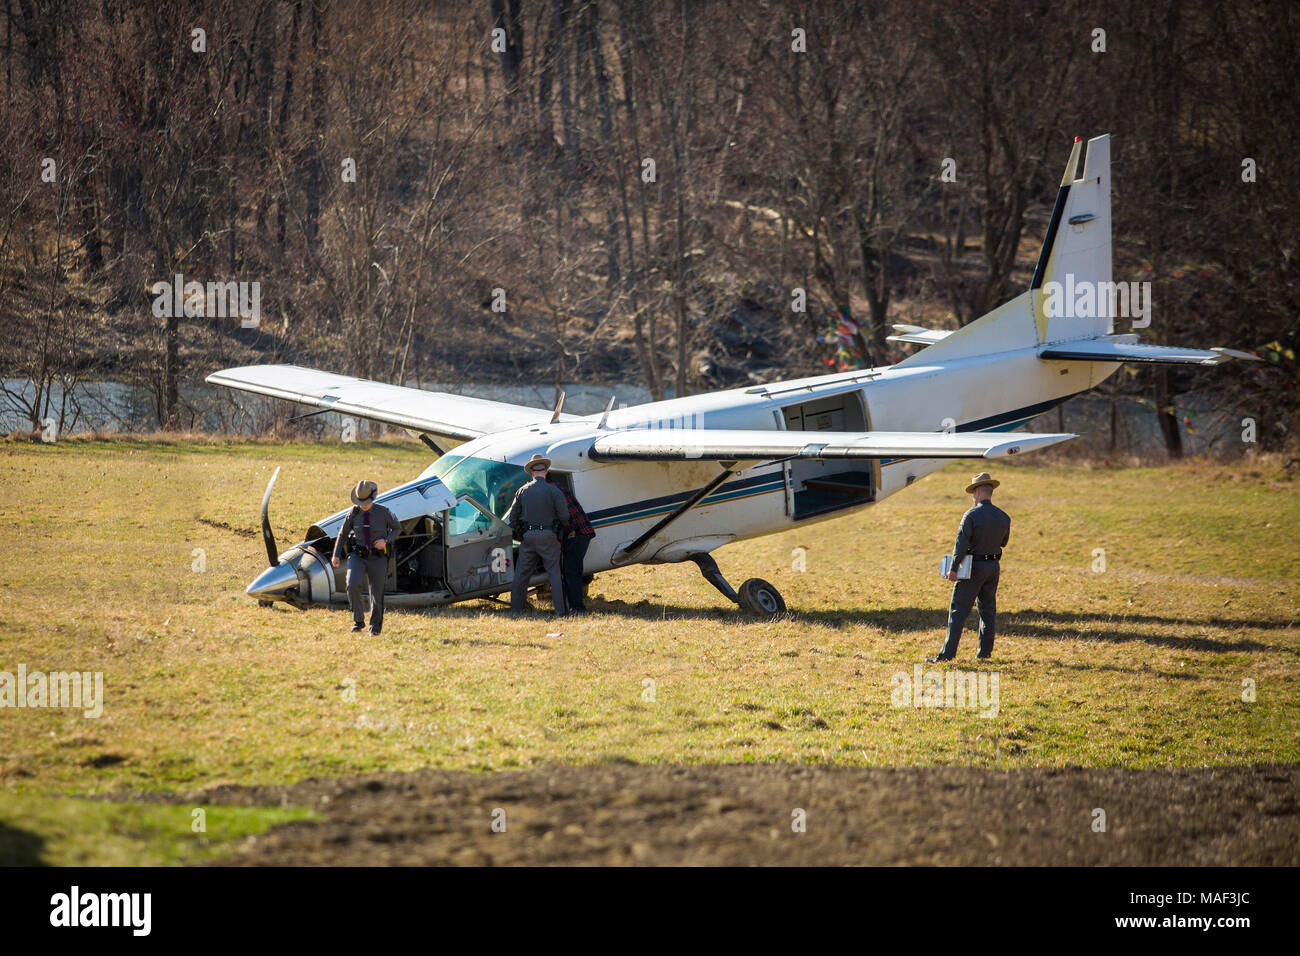 Crashed broke plane on field with police investigating Stock Photo